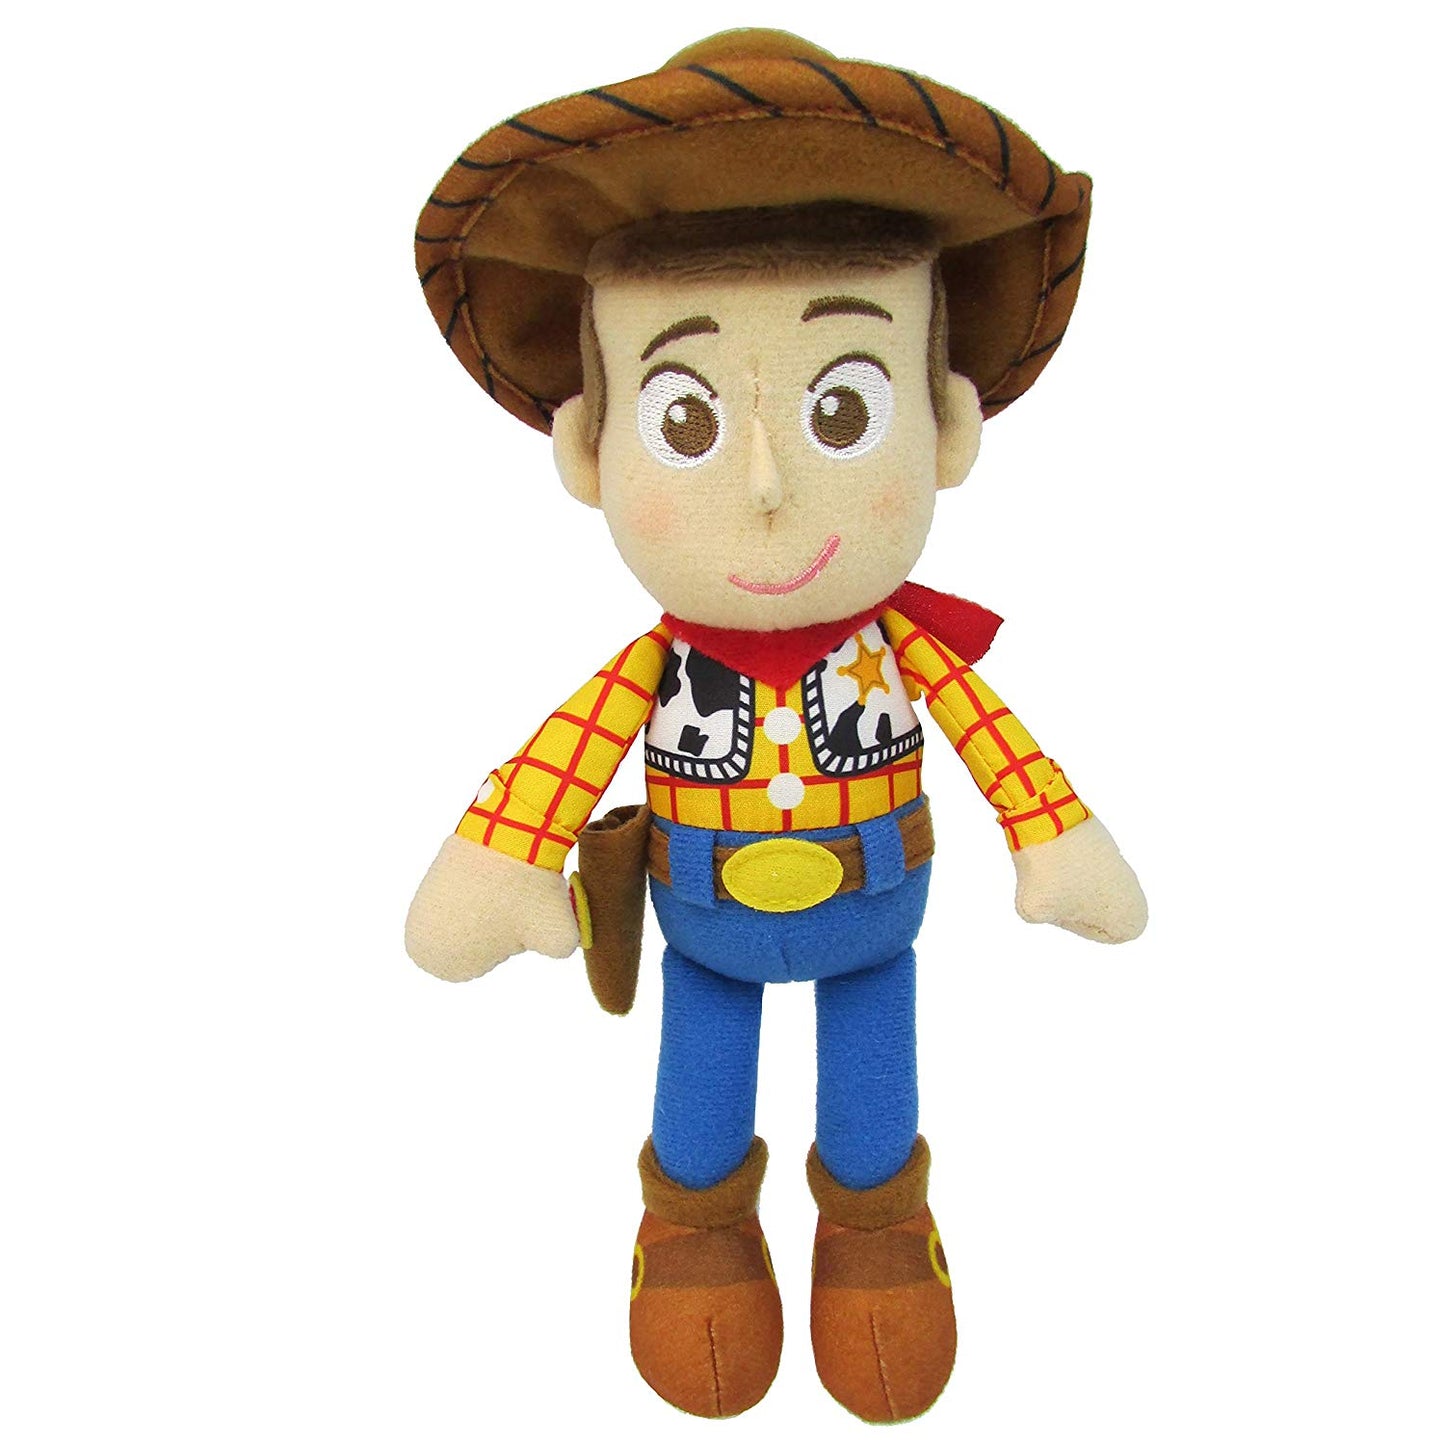 Toy Story Woody 8"